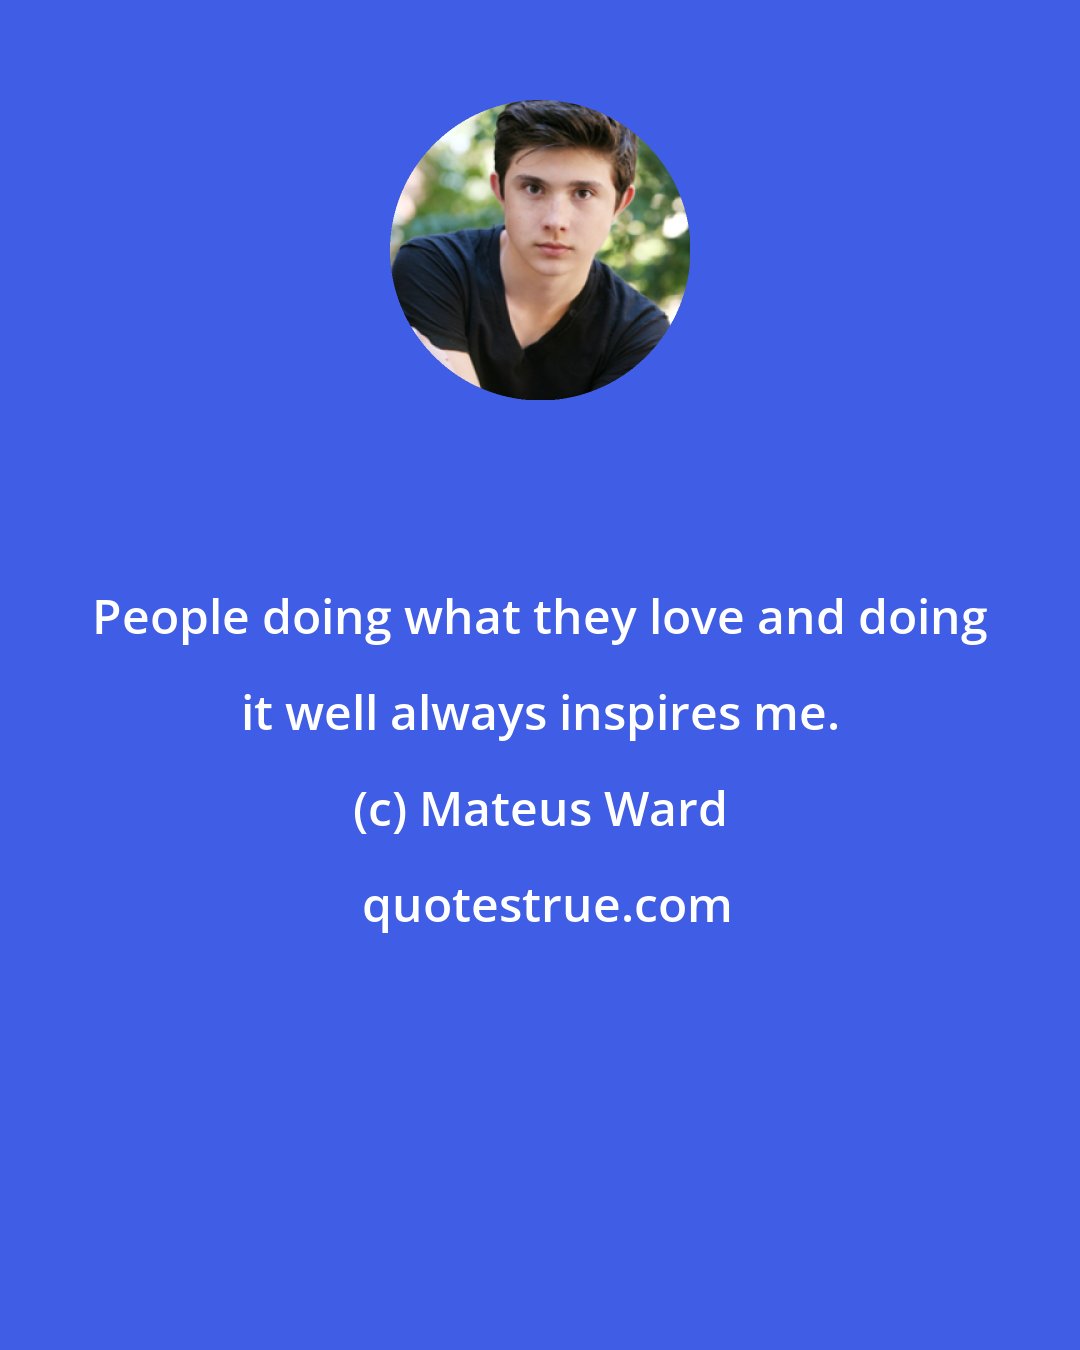 Mateus Ward: People doing what they love and doing it well always inspires me.